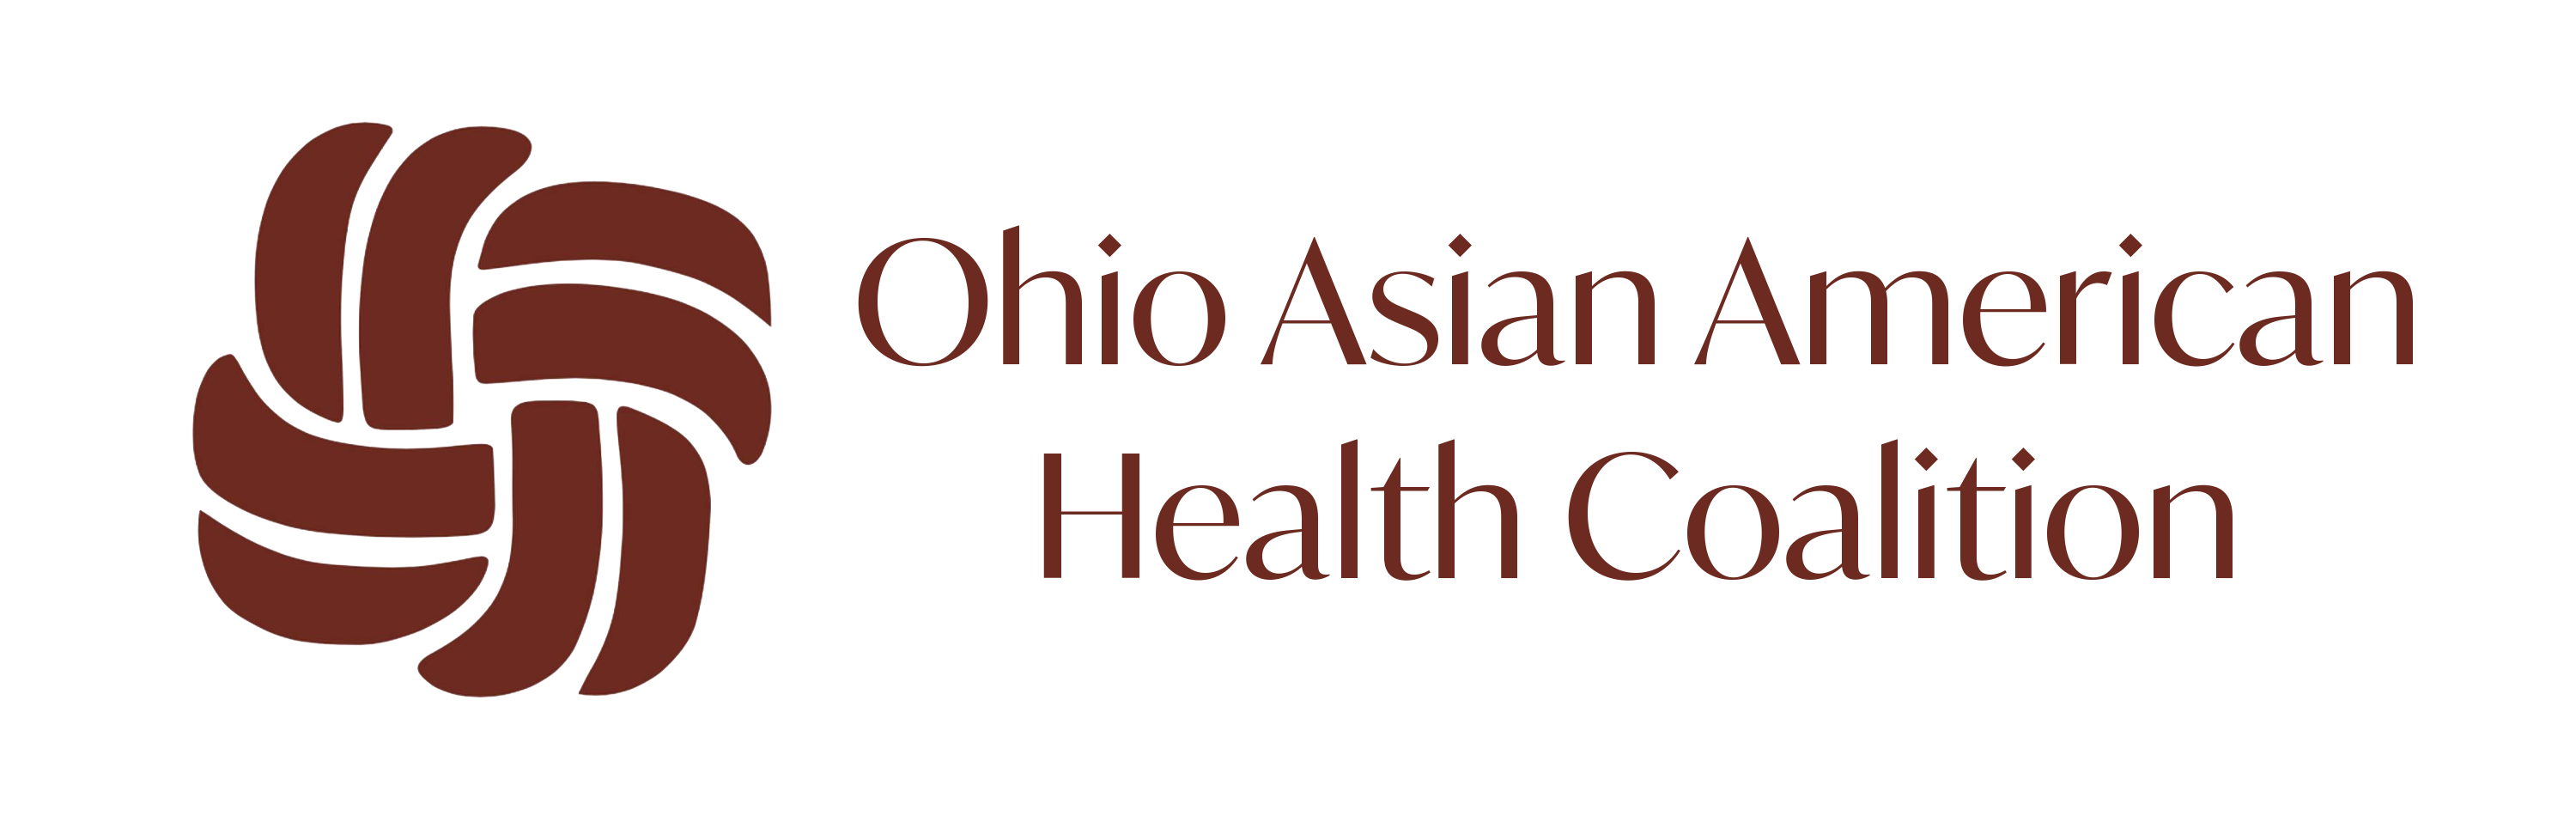 Community Partner Recognition – Dr. Anh Thu Thai Executive Director of OAAHC